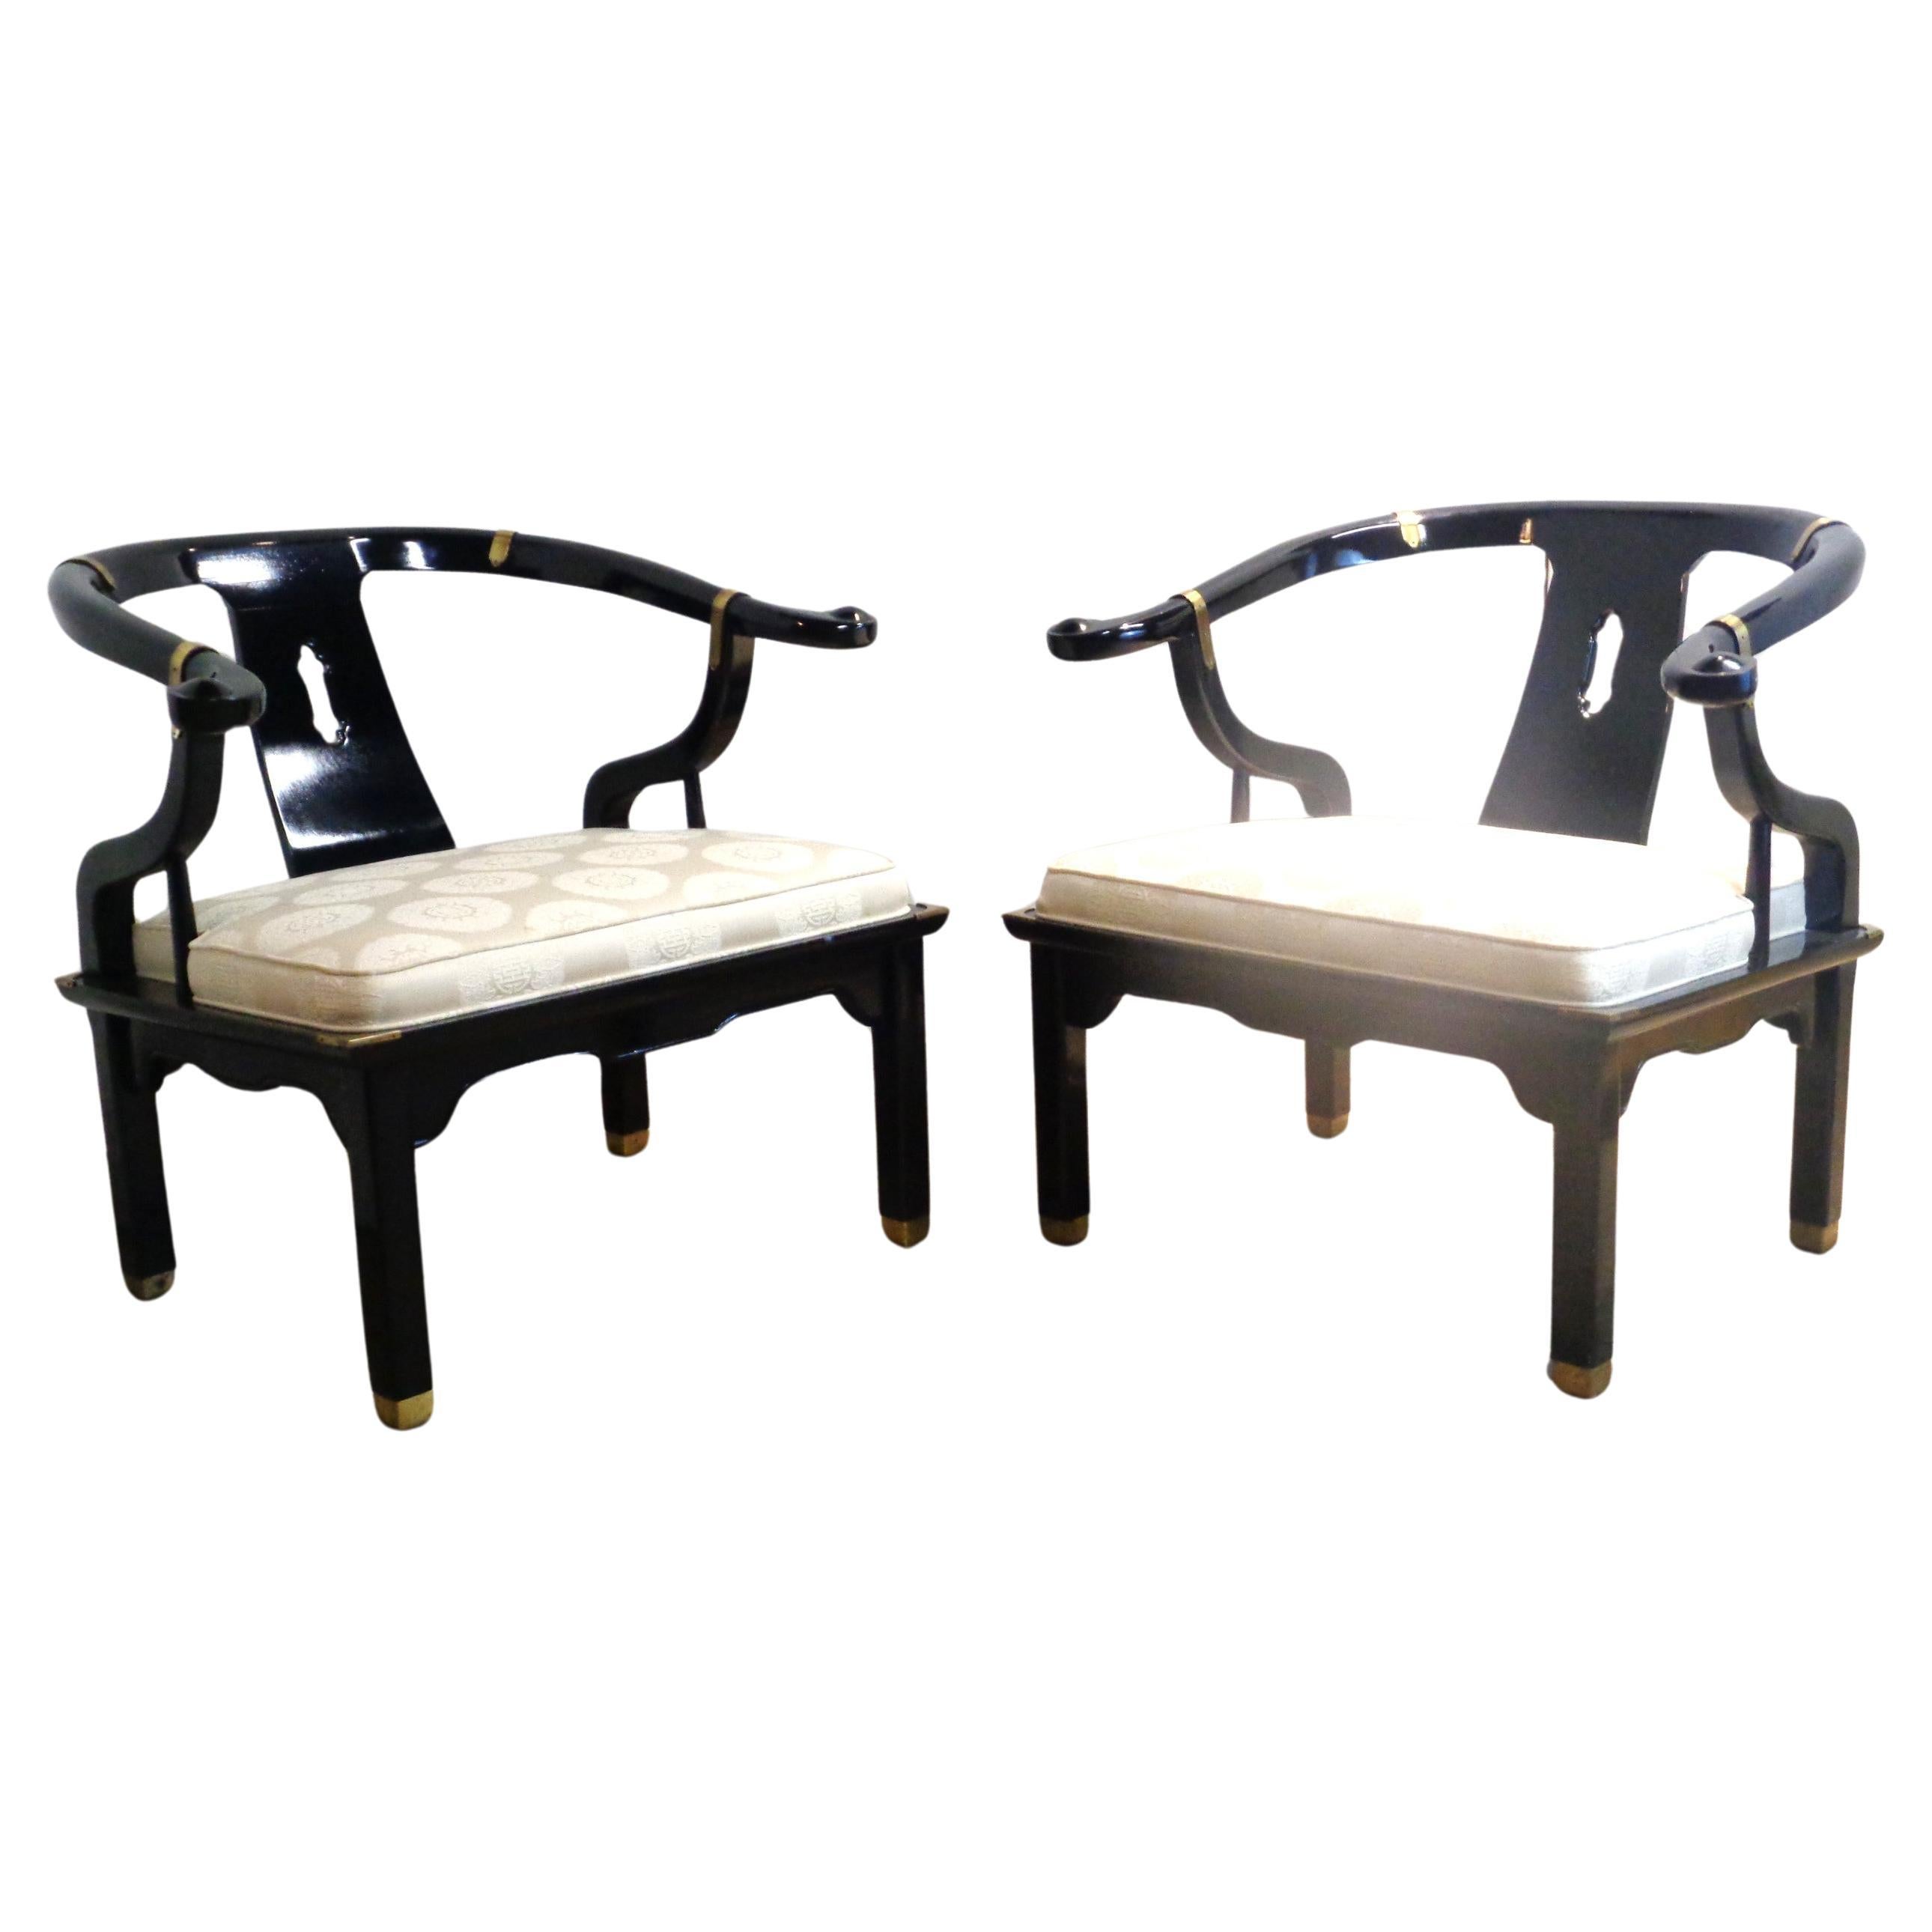 Pair of Asian modern black lacquered horseshoe back lounge chairs with brass fittings in the style of James Mont in all original beautiful glowing condition. Century Furniture Company, circa 1980's. Measure 30